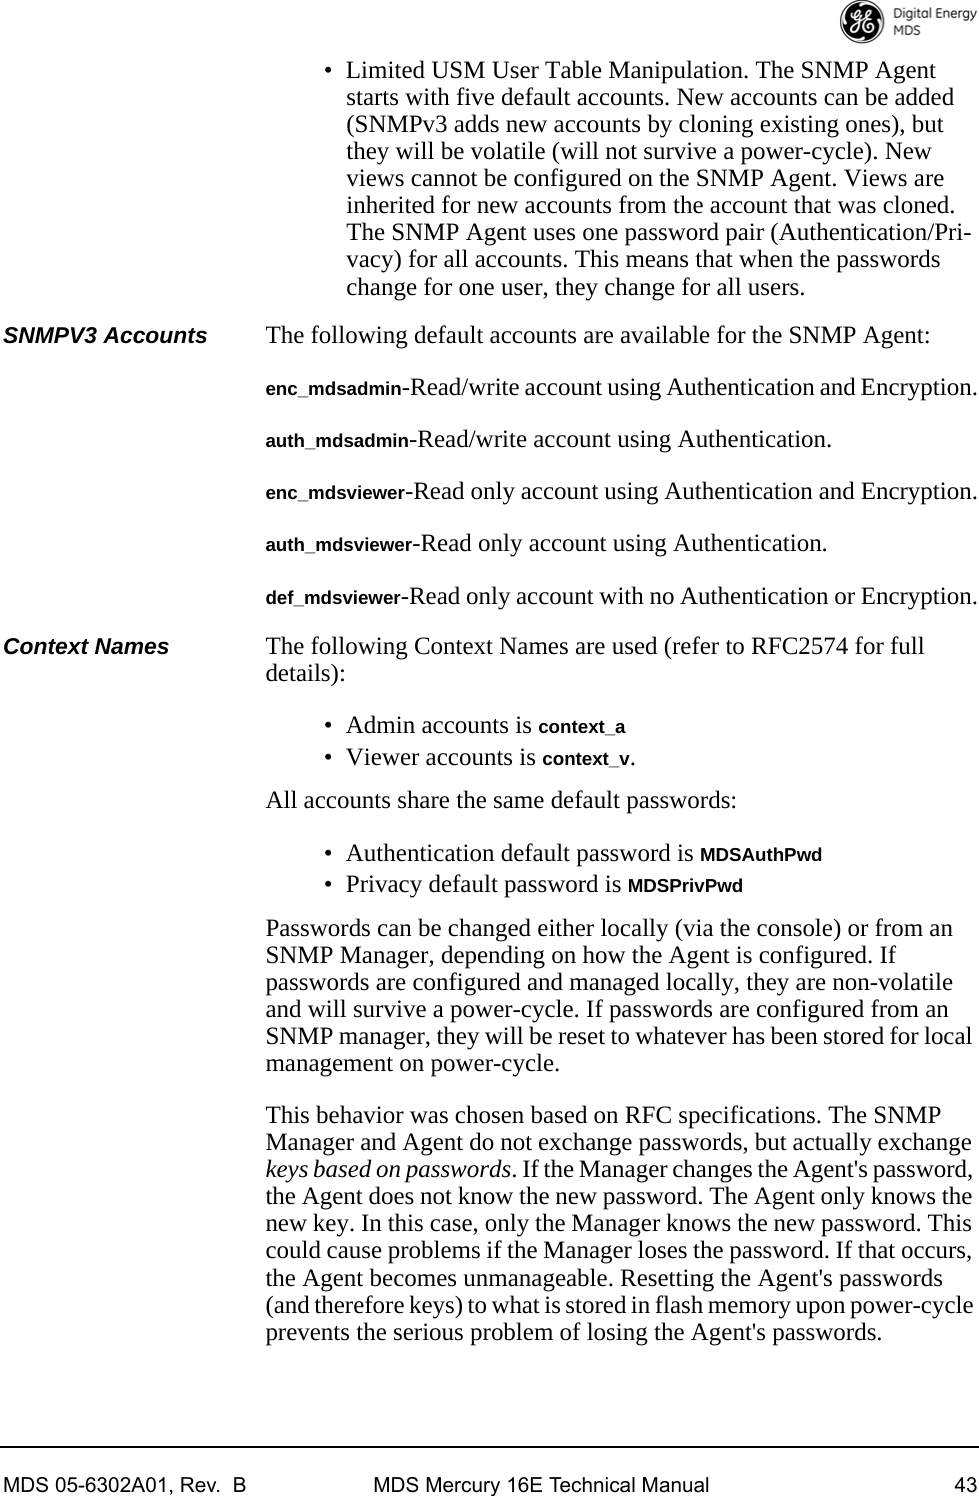 MDS 05-6302A01, Rev.  B MDS Mercury 16E Technical Manual 43• Limited USM User Table Manipulation. The SNMP Agent starts with five default accounts. New accounts can be added (SNMPv3 adds new accounts by cloning existing ones), but they will be volatile (will not survive a power-cycle). New views cannot be configured on the SNMP Agent. Views are inherited for new accounts from the account that was cloned. The SNMP Agent uses one password pair (Authentication/Pri-vacy) for all accounts. This means that when the passwords change for one user, they change for all users.SNMPV3 Accounts The following default accounts are available for the SNMP Agent:enc_mdsadmin-Read/write account using Authentication and Encryption.auth_mdsadmin-Read/write account using Authentication.enc_mdsviewer-Read only account using Authentication and Encryption.auth_mdsviewer-Read only account using Authentication.def_mdsviewer-Read only account with no Authentication or Encryption.Context Names The following Context Names are used (refer to RFC2574 for full details):• Admin accounts is context_a• Viewer accounts is context_v. All accounts share the same default passwords: • Authentication default password is MDSAuthPwd• Privacy default password is MDSPrivPwdPasswords can be changed either locally (via the console) or from an SNMP Manager, depending on how the Agent is configured. If passwords are configured and managed locally, they are non-volatile and will survive a power-cycle. If passwords are configured from an SNMP manager, they will be reset to whatever has been stored for local management on power-cycle.This behavior was chosen based on RFC specifications. The SNMP Manager and Agent do not exchange passwords, but actually exchange keys based on passwords. If the Manager changes the Agent&apos;s password, the Agent does not know the new password. The Agent only knows the new key. In this case, only the Manager knows the new password. This could cause problems if the Manager loses the password. If that occurs, the Agent becomes unmanageable. Resetting the Agent&apos;s passwords (and therefore keys) to what is stored in flash memory upon power-cycle prevents the serious problem of losing the Agent&apos;s passwords.